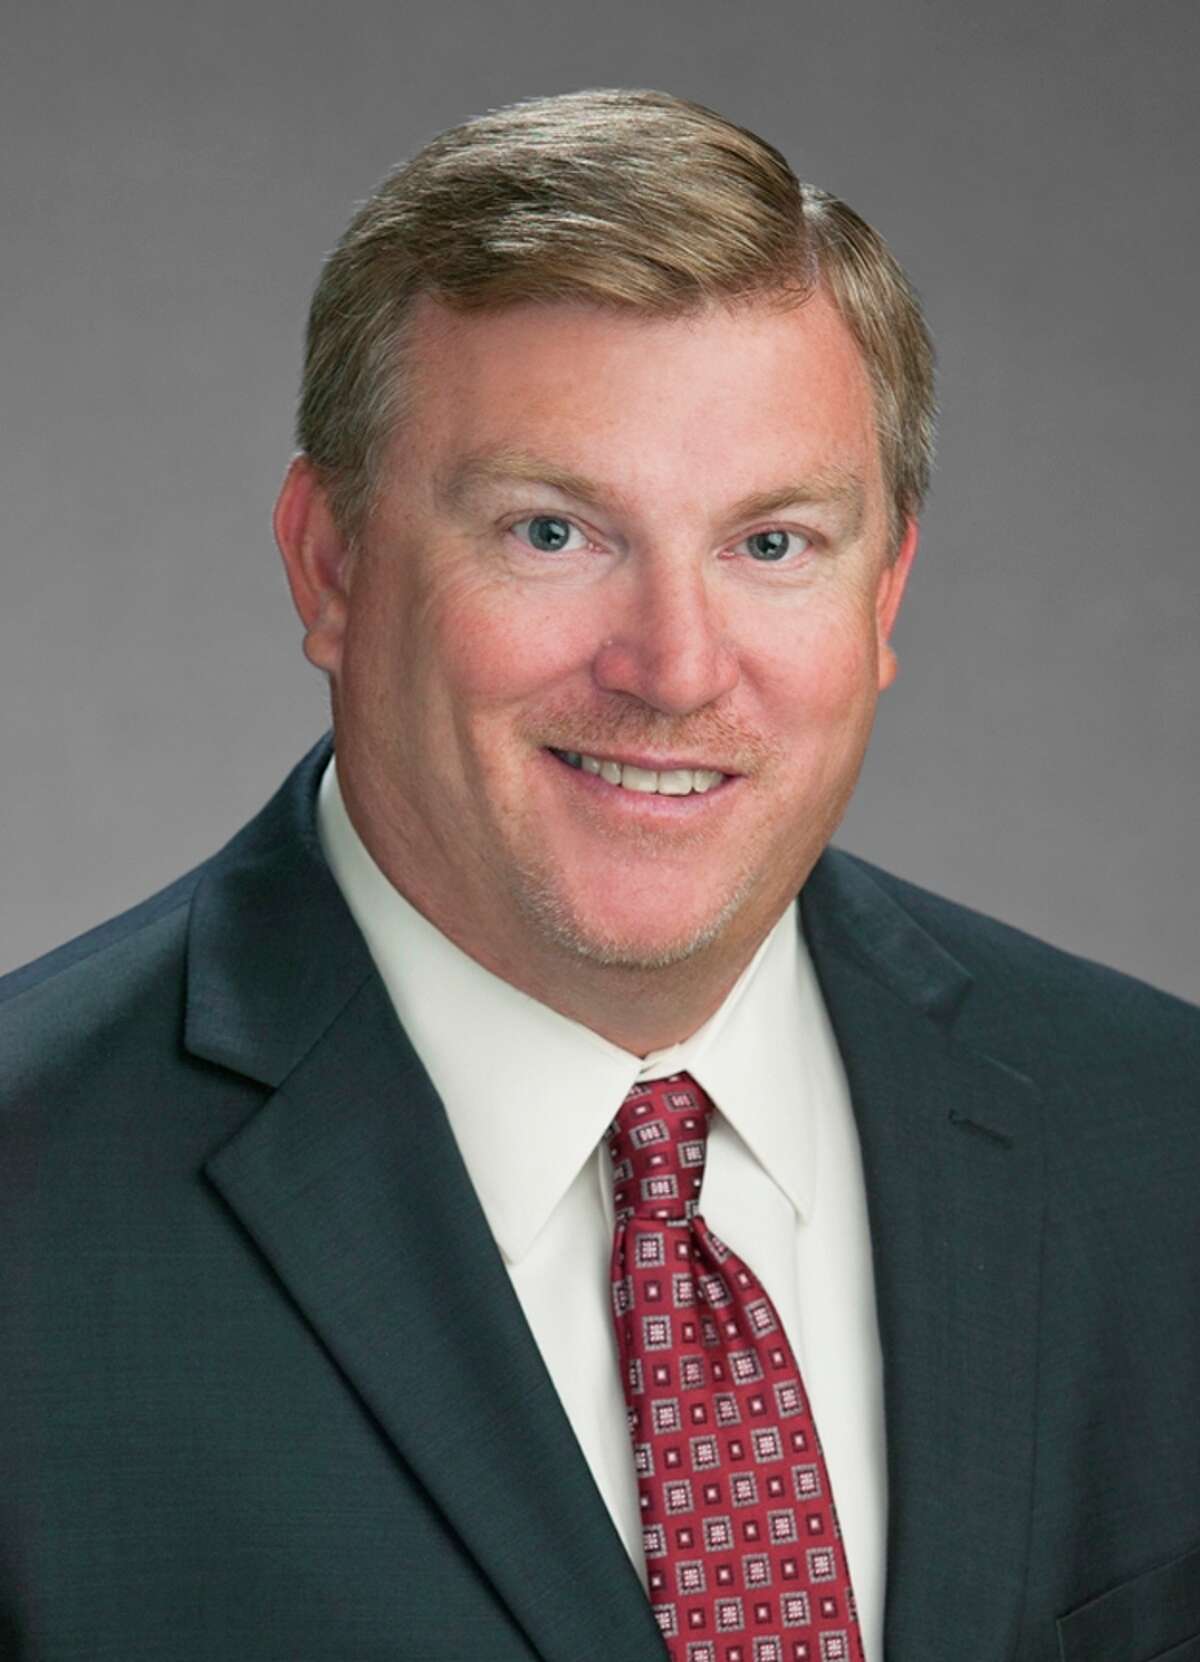 Randy Stewart, president of Amegy Mortgage, has also been named as managing director of the Enterprise Mortgage Group within AmegyÂ?’s parent company, Zions Bancorporation.